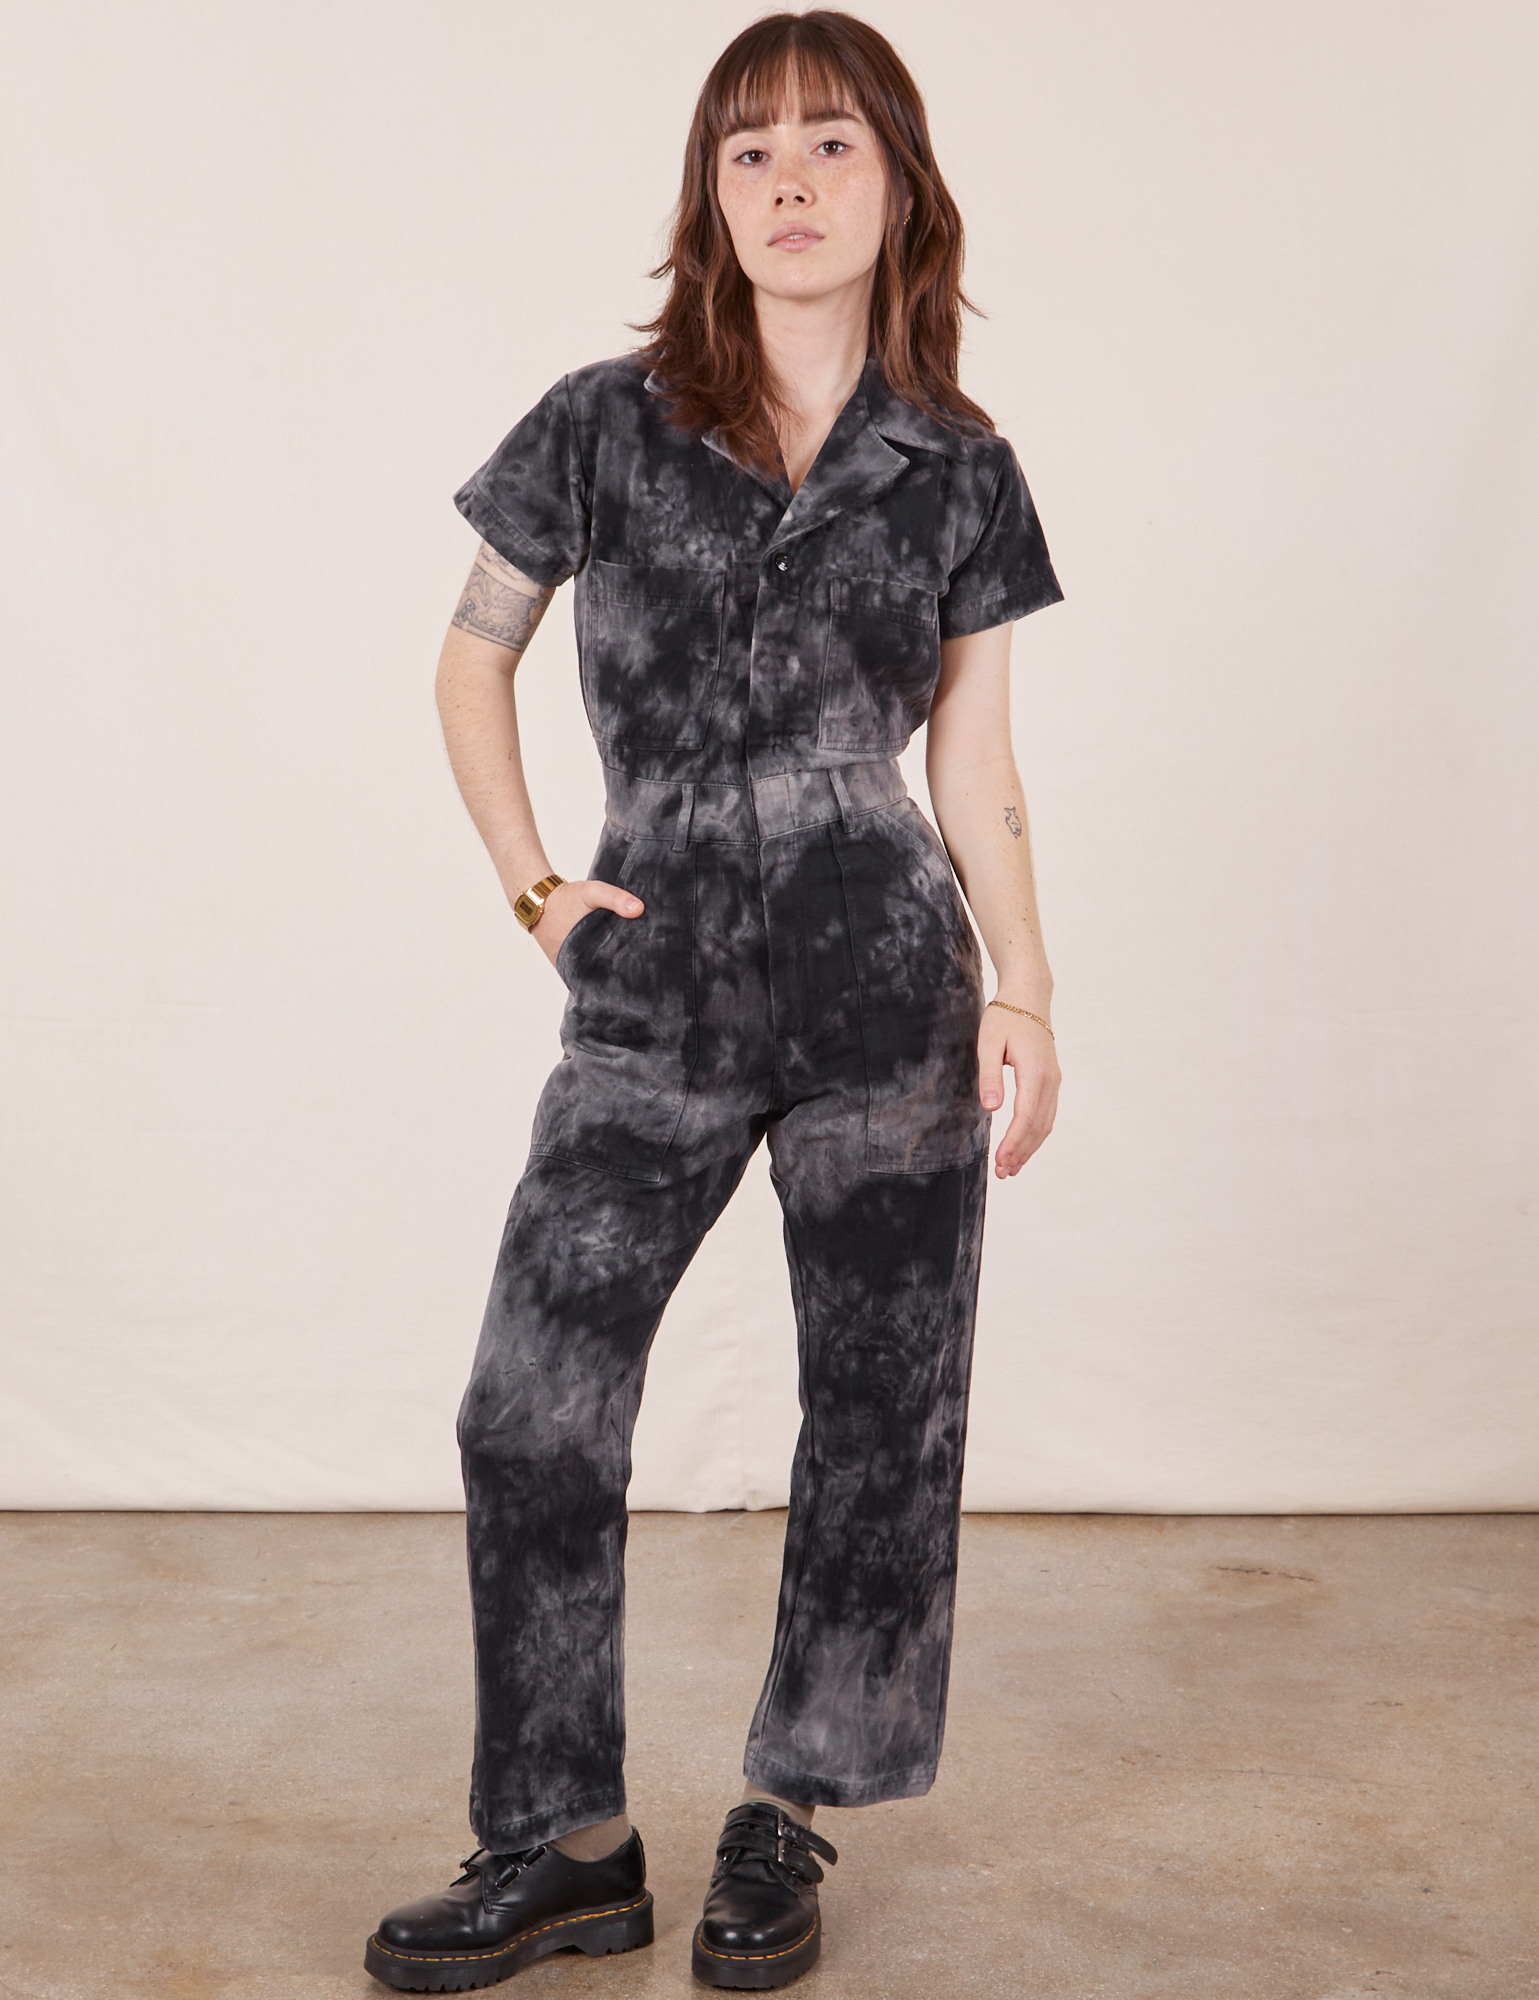 Hana is 5&#39;3&quot; and wearing XXS Petite Petite Short Sleeve Jumpsuit in Black Magic Waters